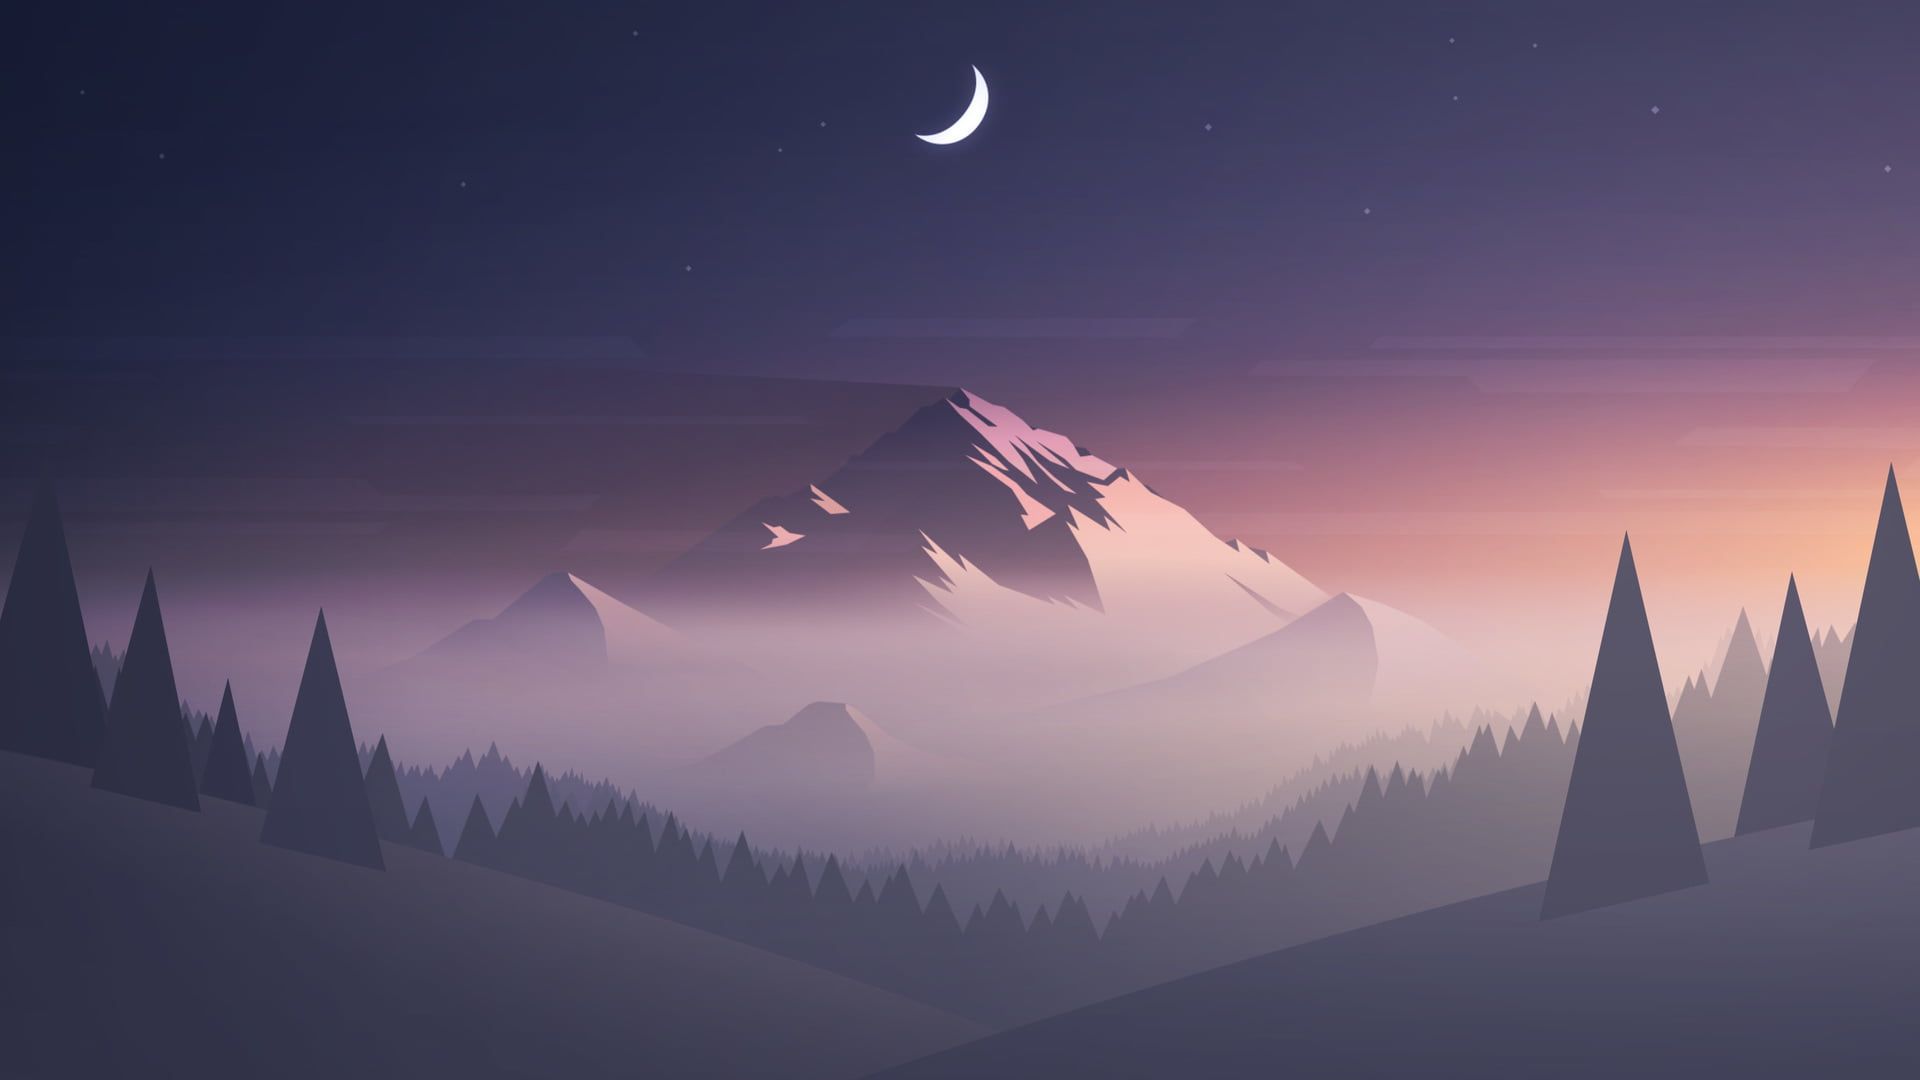 A mountain with trees and the moon in it - Mountain